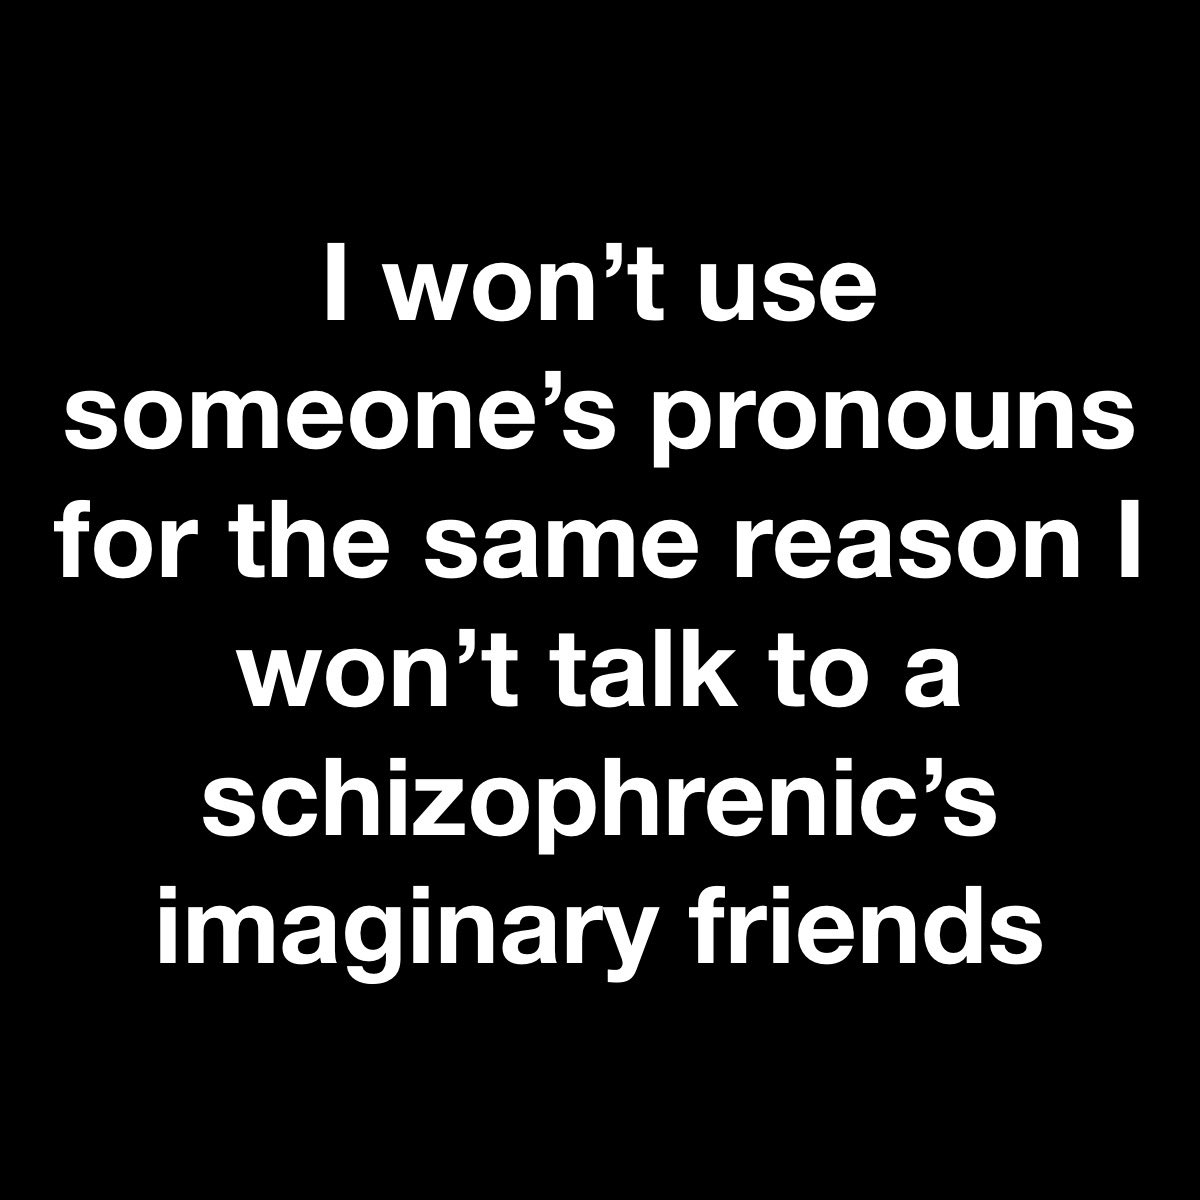 Pronouns trending today. This sums it up...
#LGBWithoutTheT #twam #TransWomenAreConMen #adulthumanfemale #WomanFace